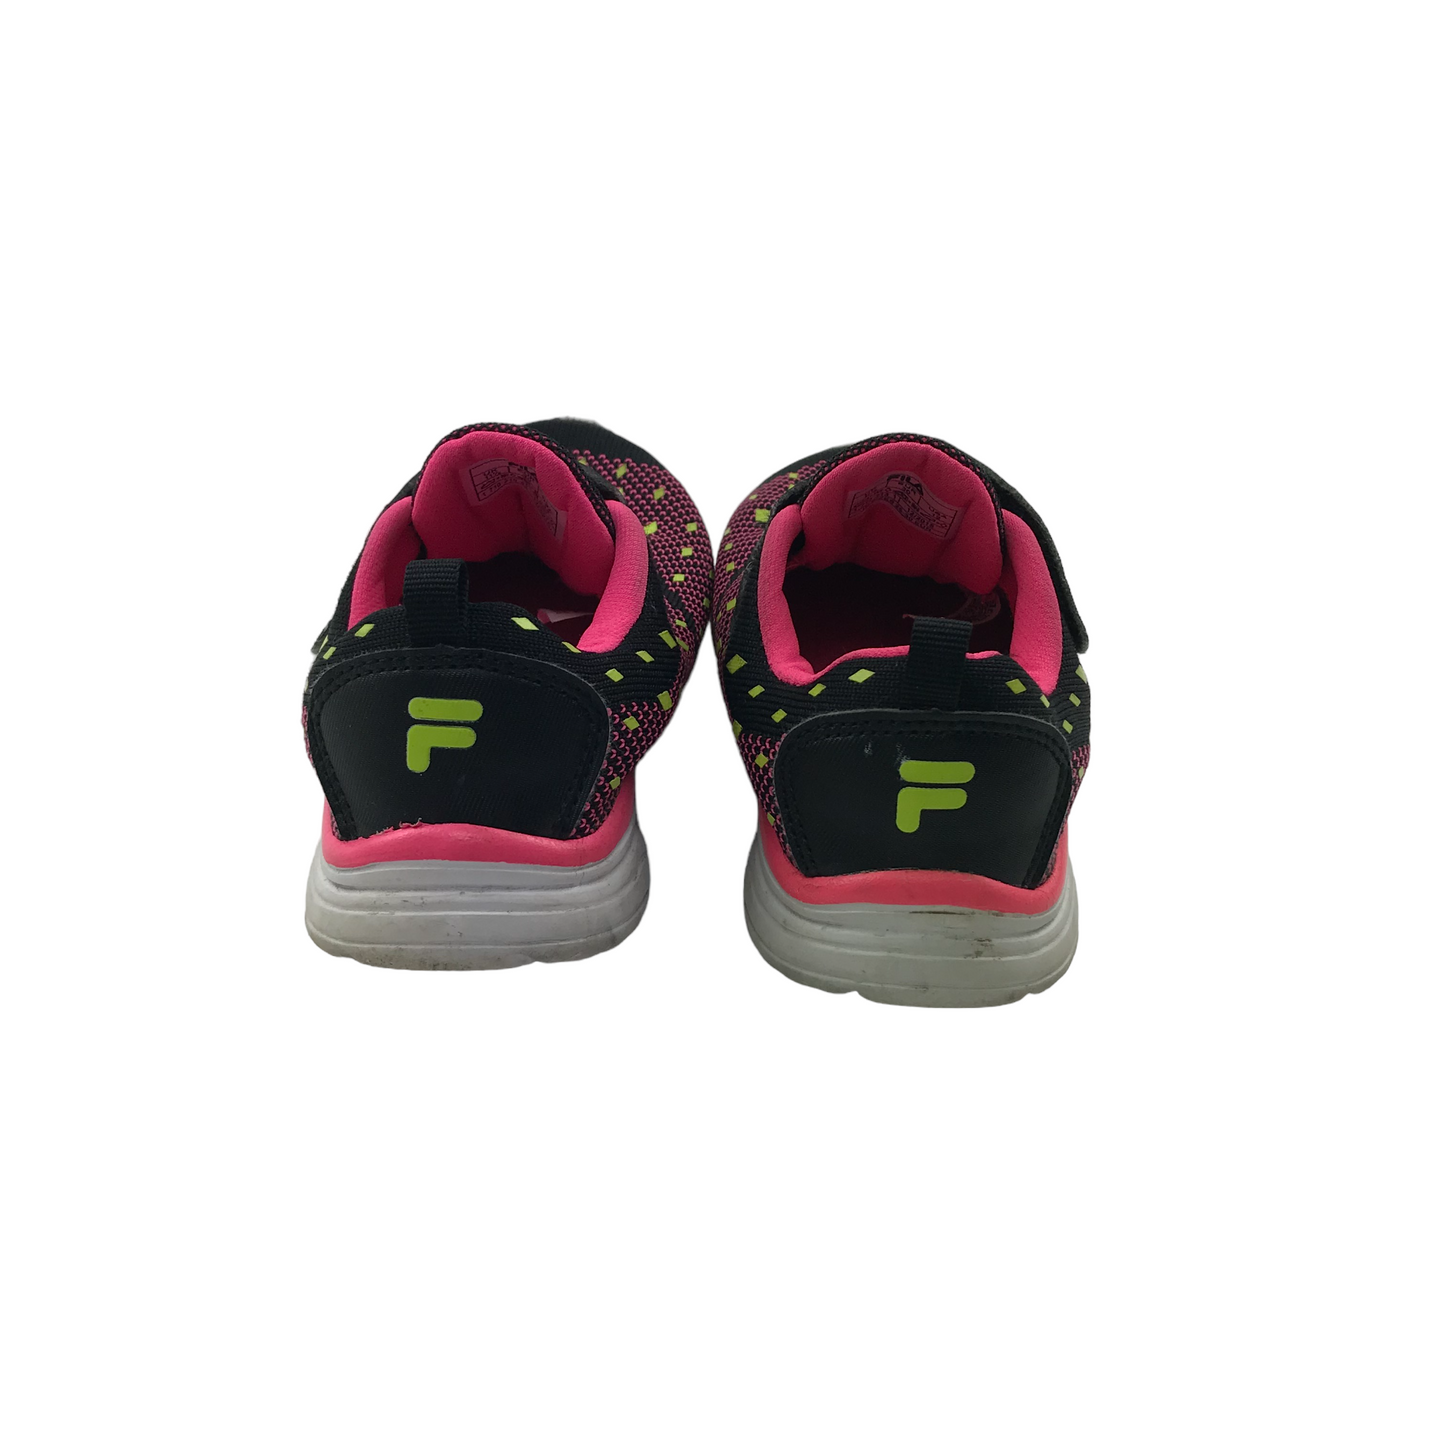 Fila Black and Pink Trainers Shoe Size 11 junior